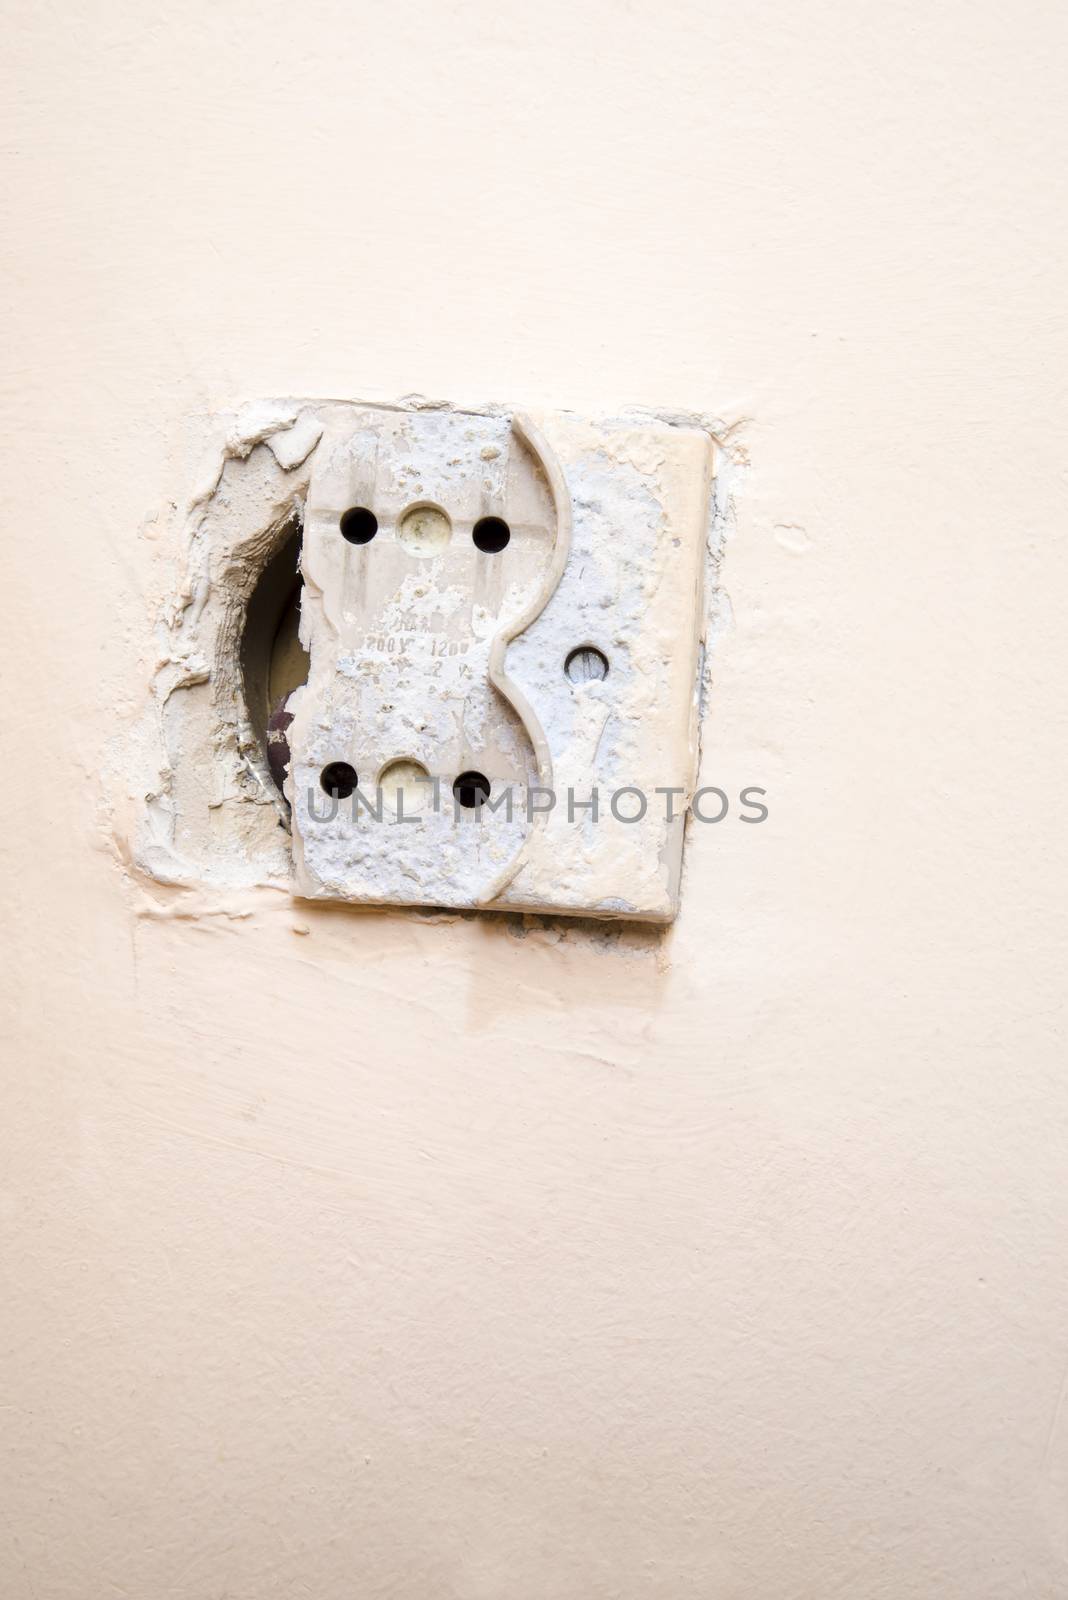 Old and broken electrical socket on the wall